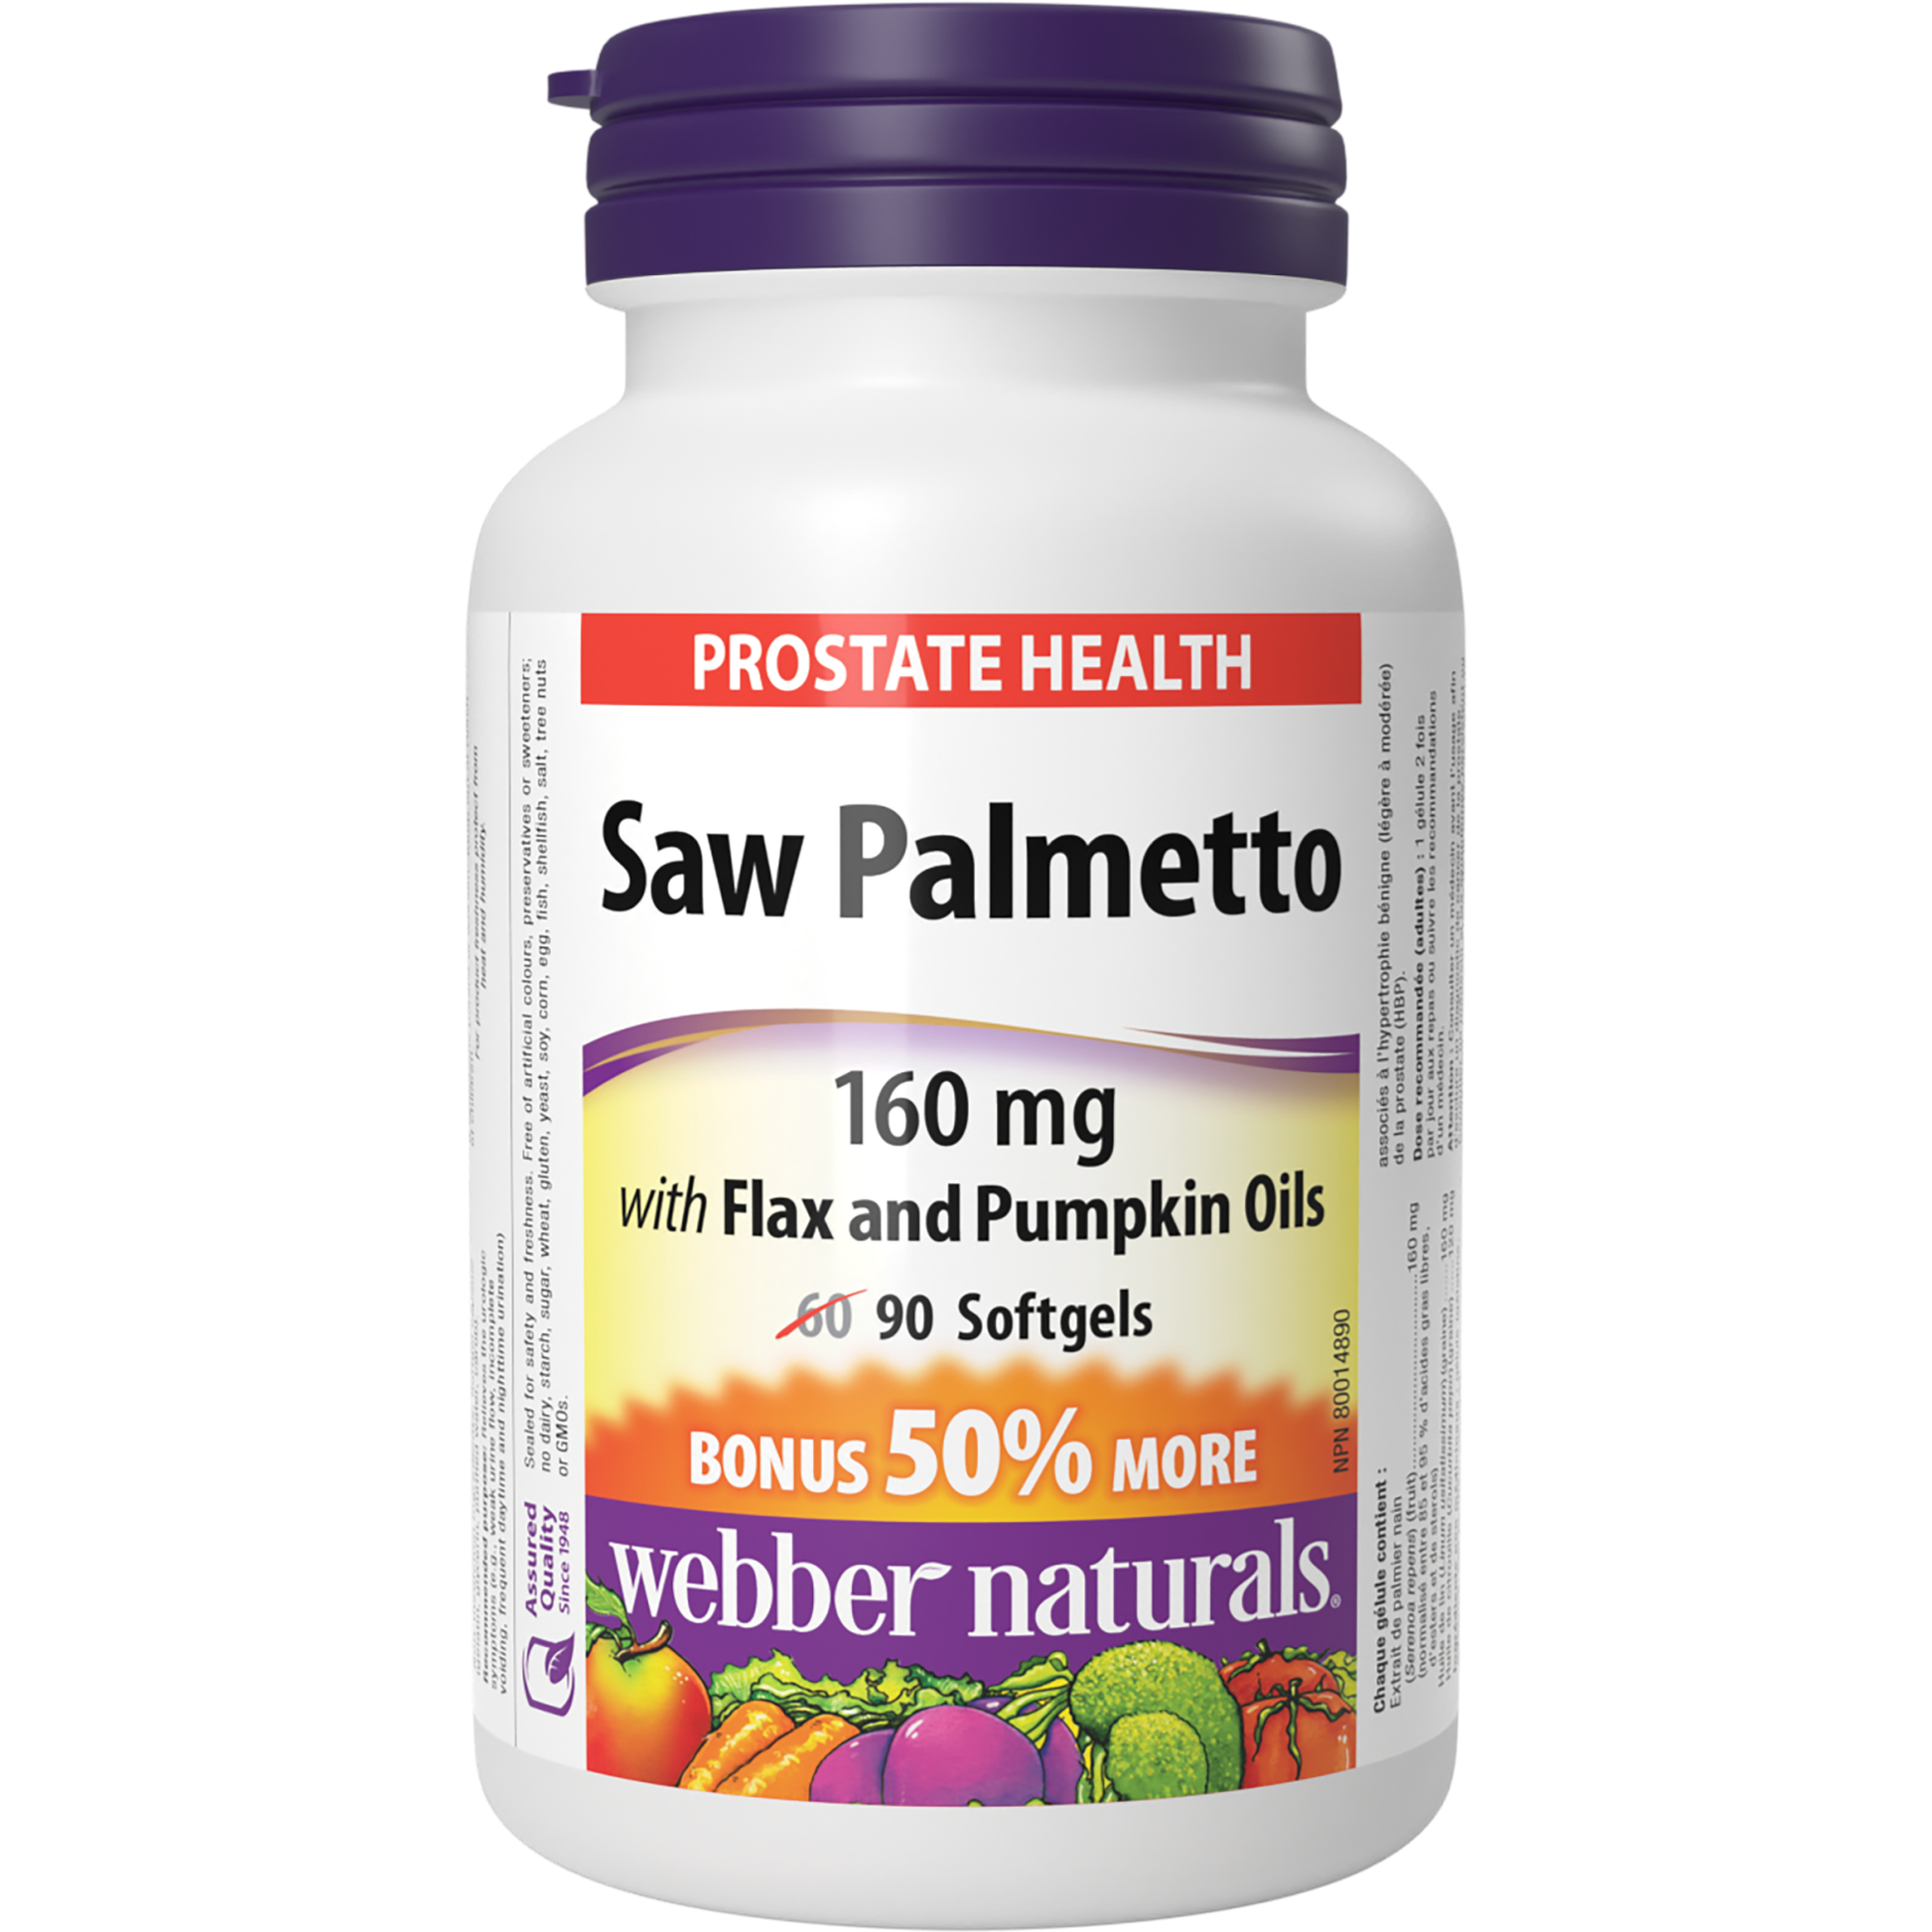 Saw Palmetto with Flax and Pumpkin Oils 160 mg for Webber Naturals|v|hi-res|WN3840